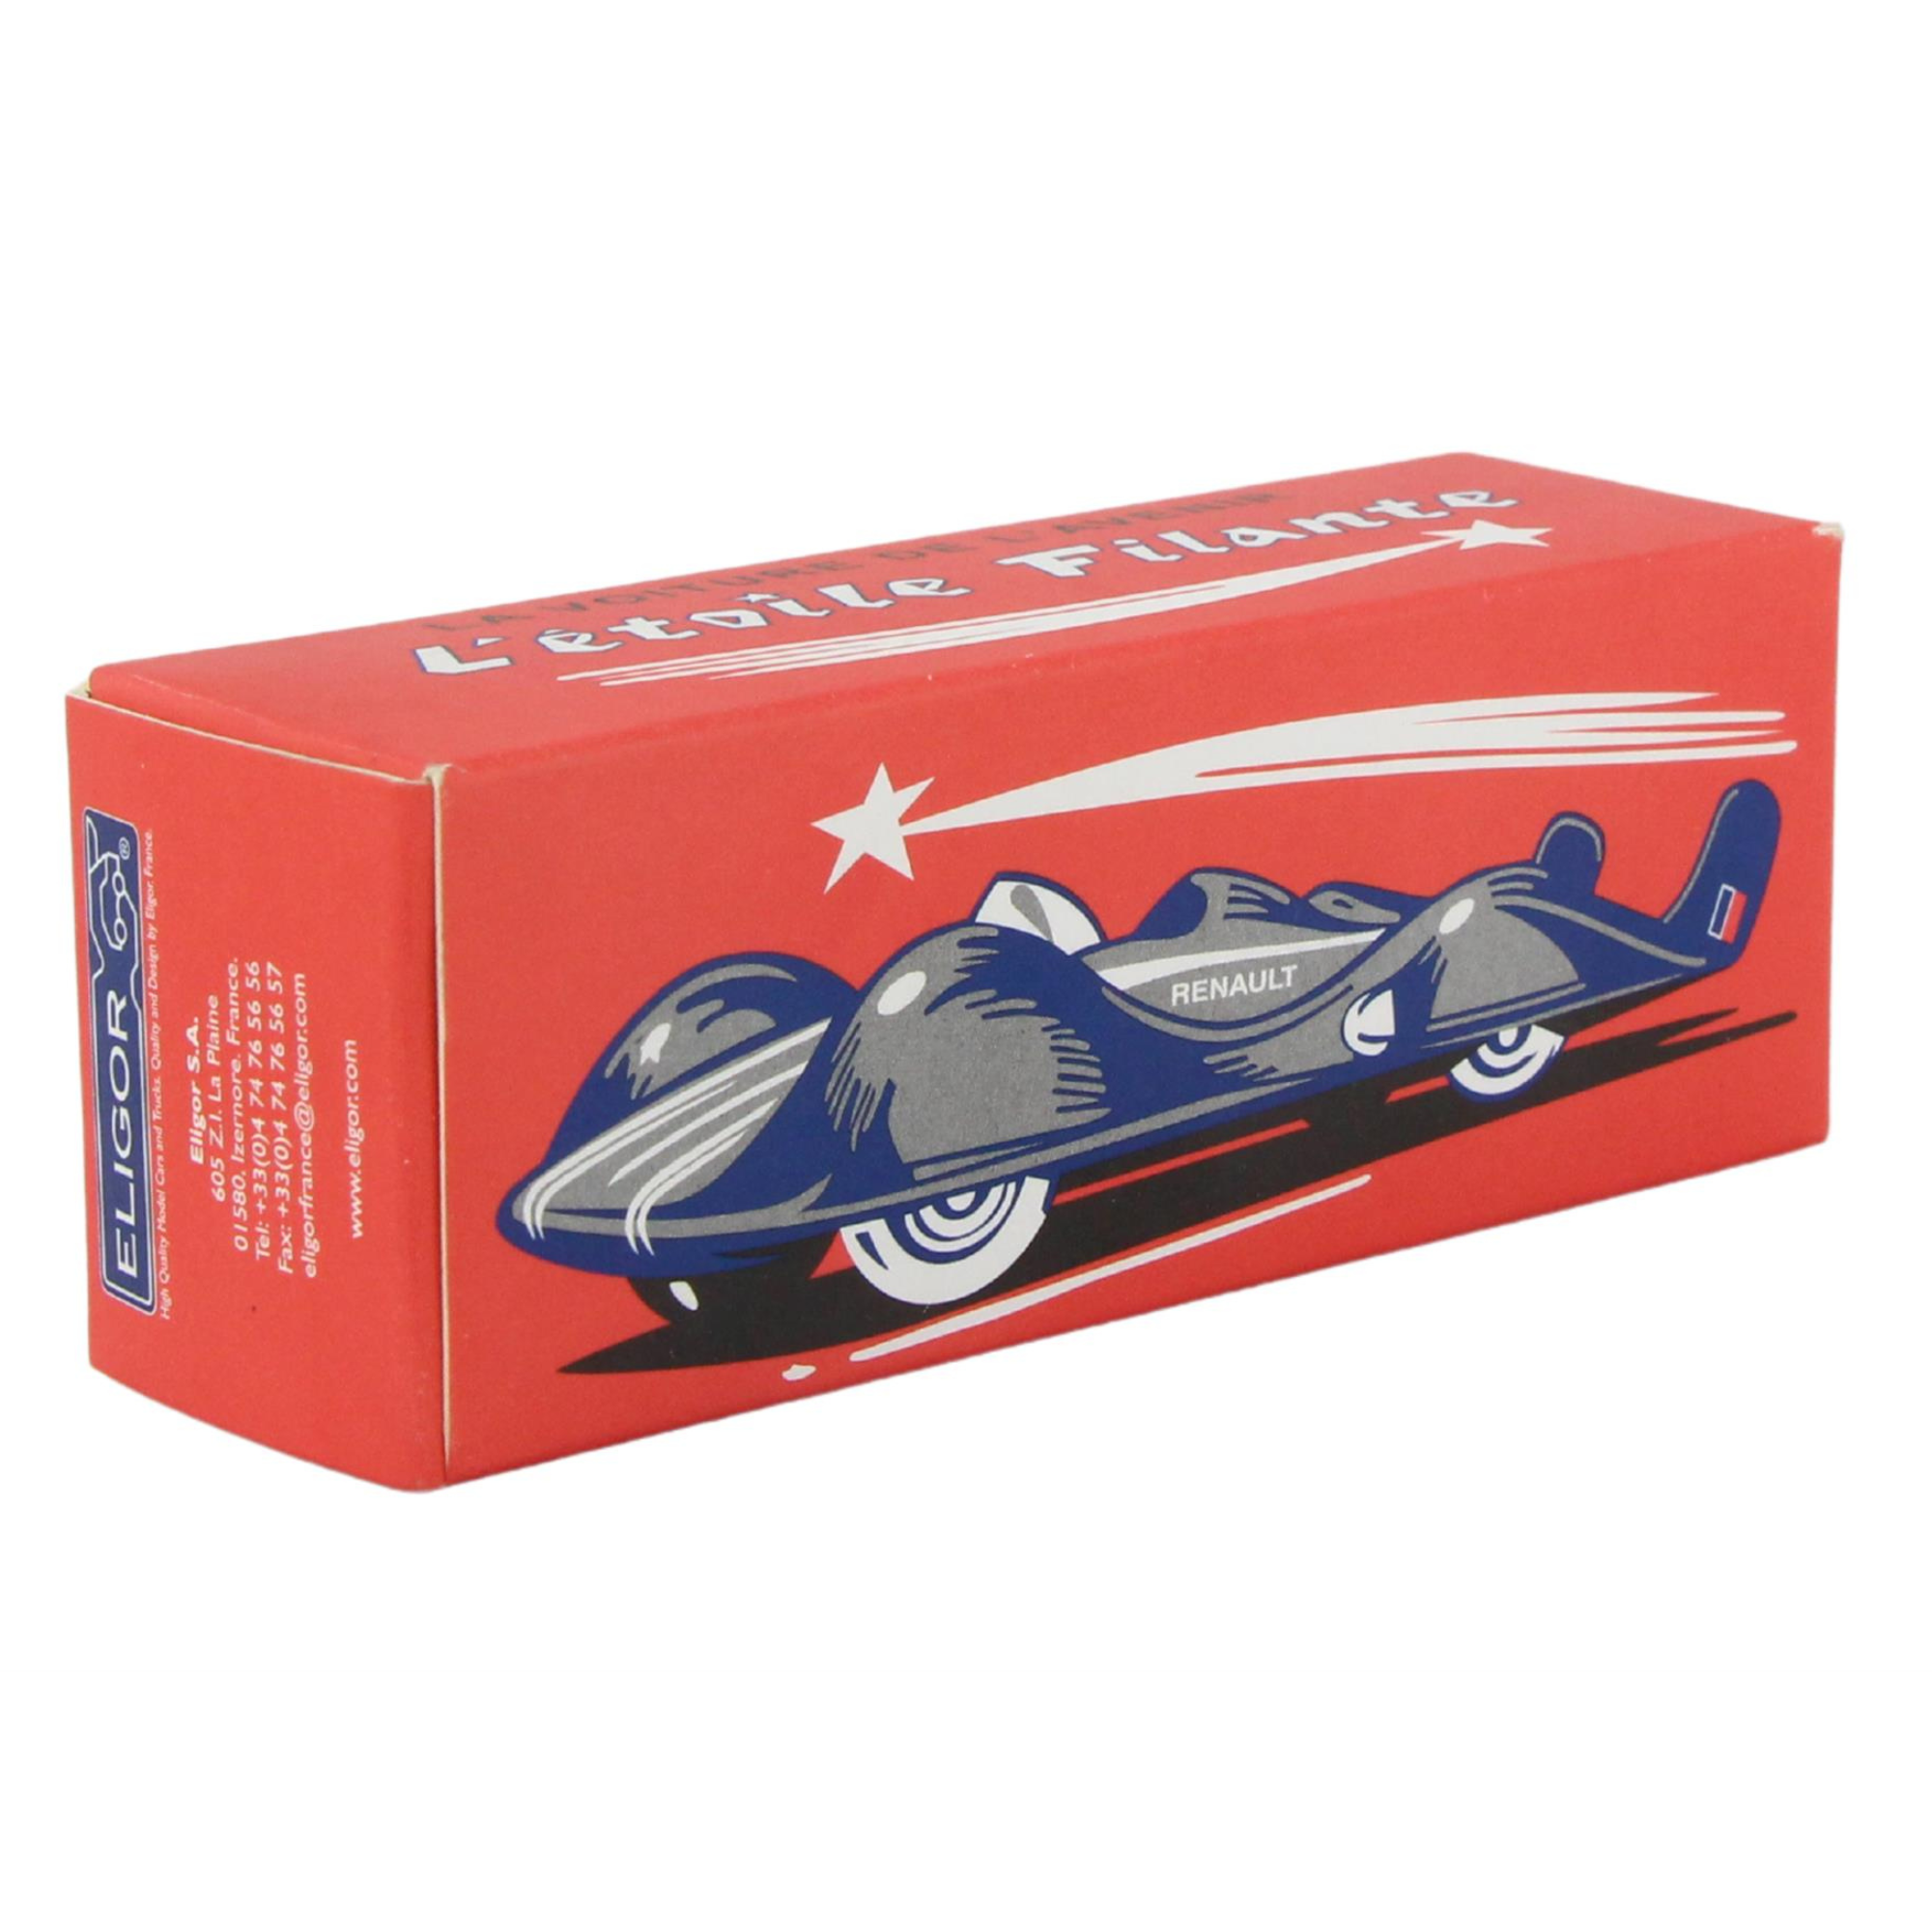 Eligor Models - 1:43 Scale Diecast "Voiture A Turbine 309 Kms Heure - Letoile Filante - New Unopened Still with Original Packaging - Toptoys2u